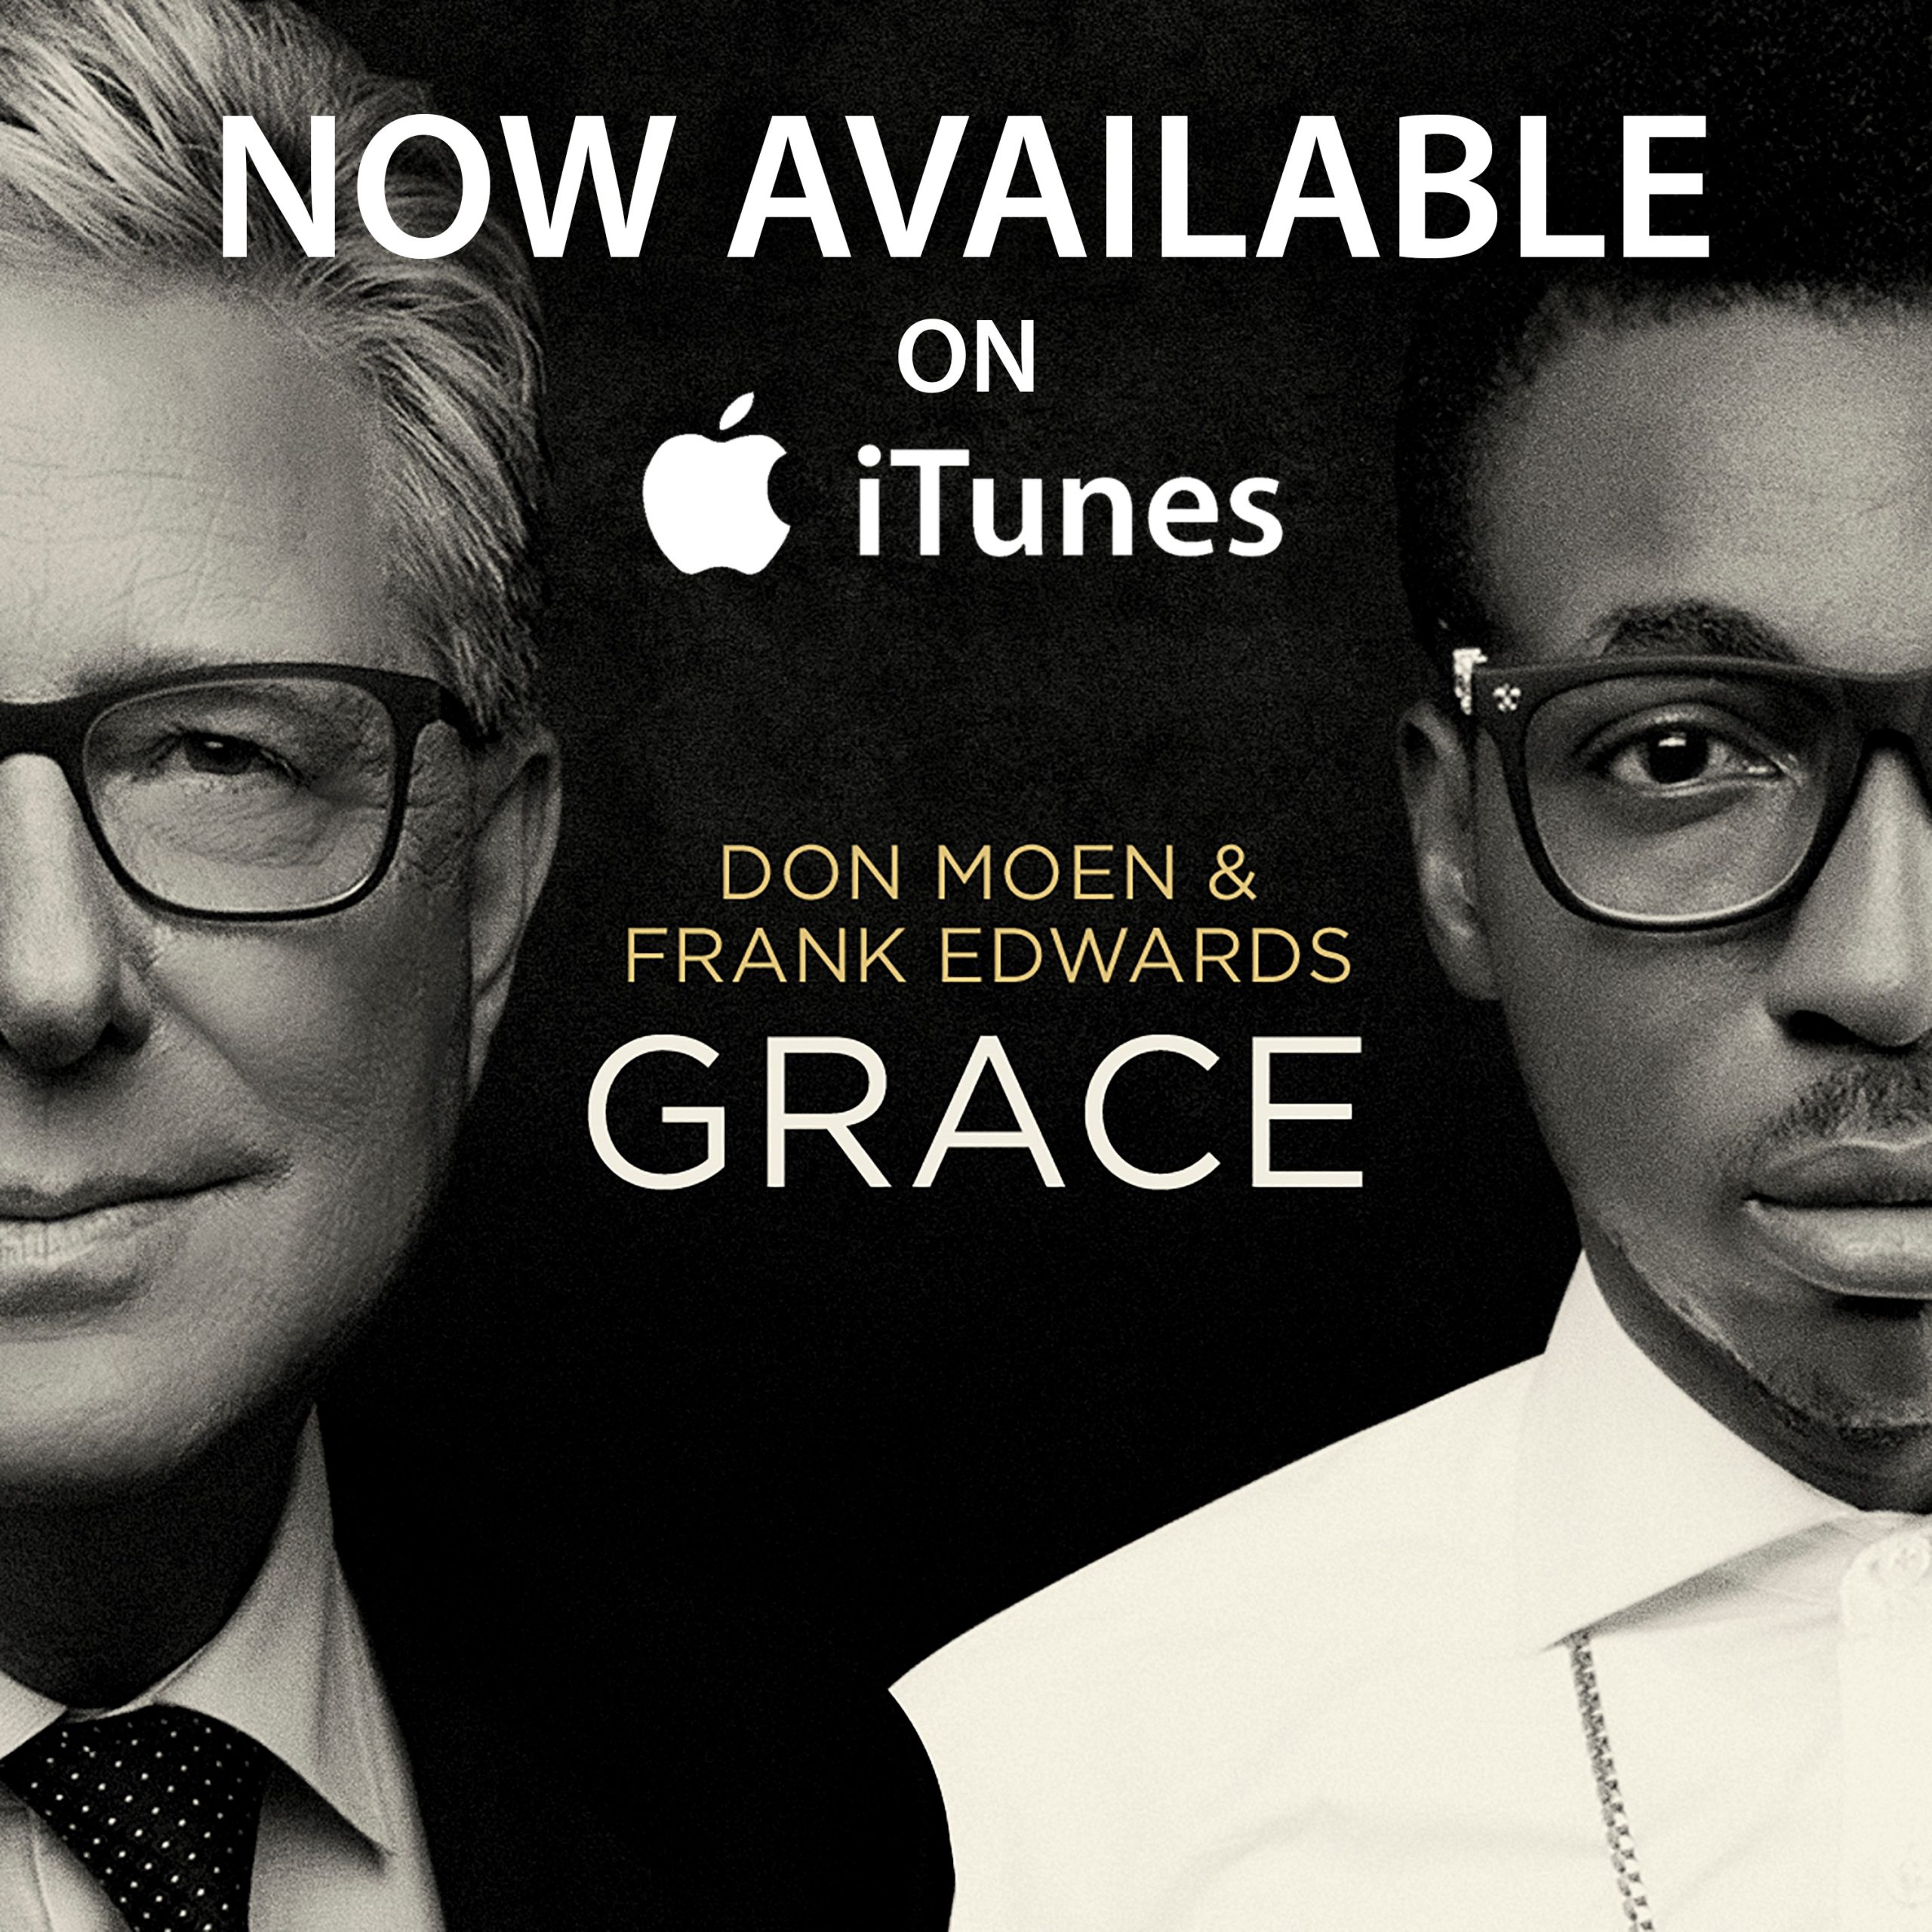 New EP “Grace” Now Available